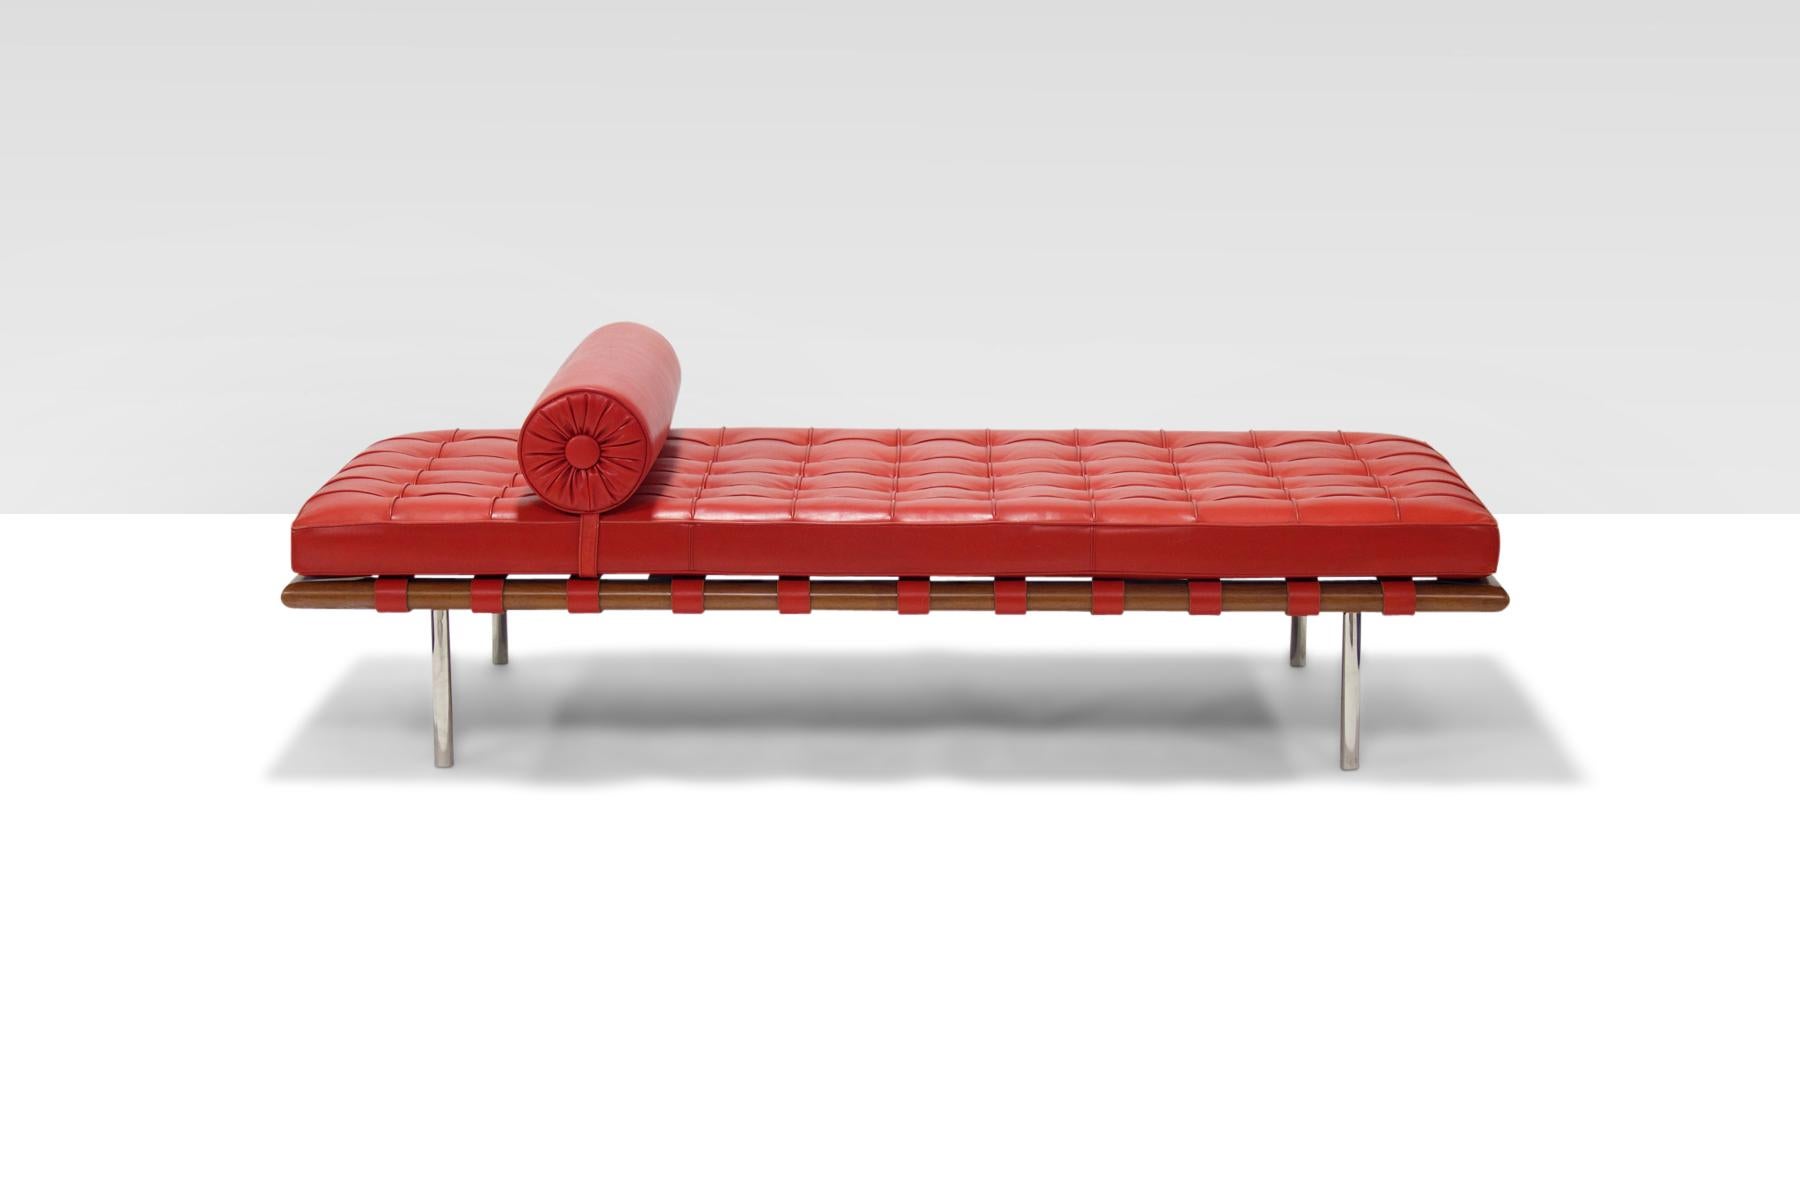 Iconic Mies van der Rohe daybed manufactured by Knoll in walnut and red leather. Designed in 1930 by the renowned architect. Signed and in excellent vintage condition.